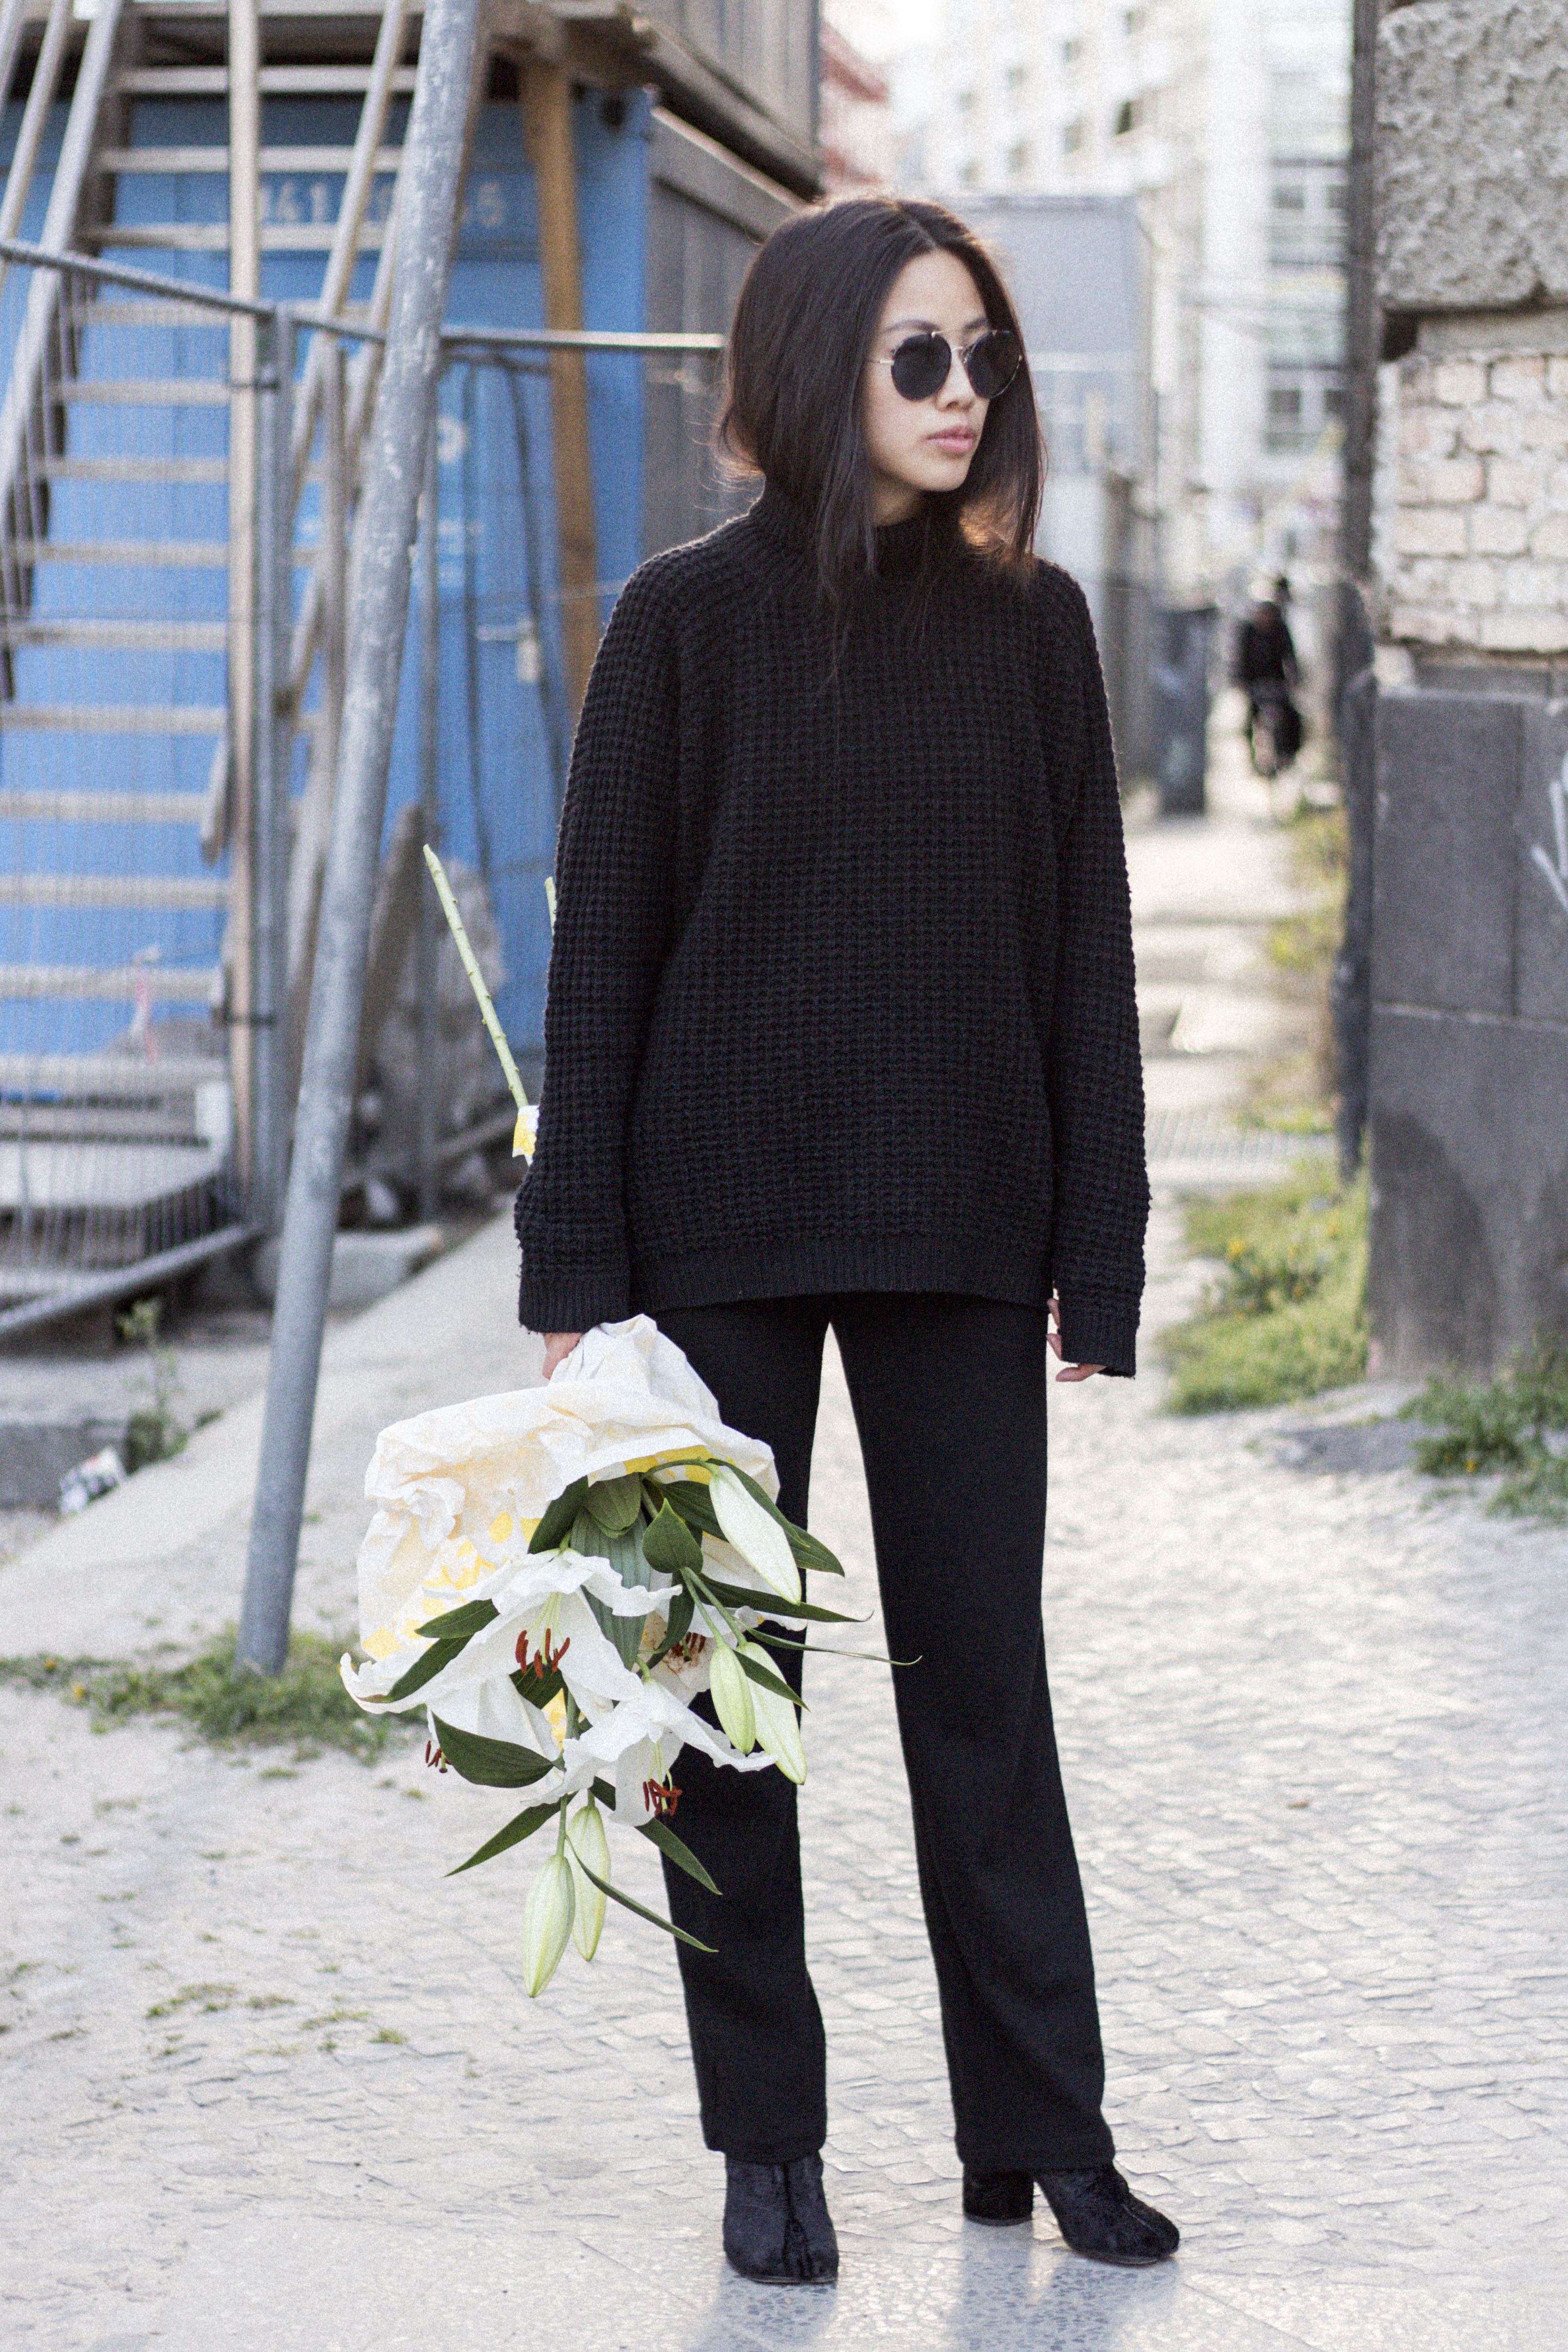 IHEARTALICE.DE – Fashion & Travel-Blog by Alice M. Huynh from Berlin/Germany: All black Everything Look wearing Max Mara Weekend Flare Pants, Maison Martin margiela Tabi Boots, Turtleneck Knit & Prada Shades / OOTD